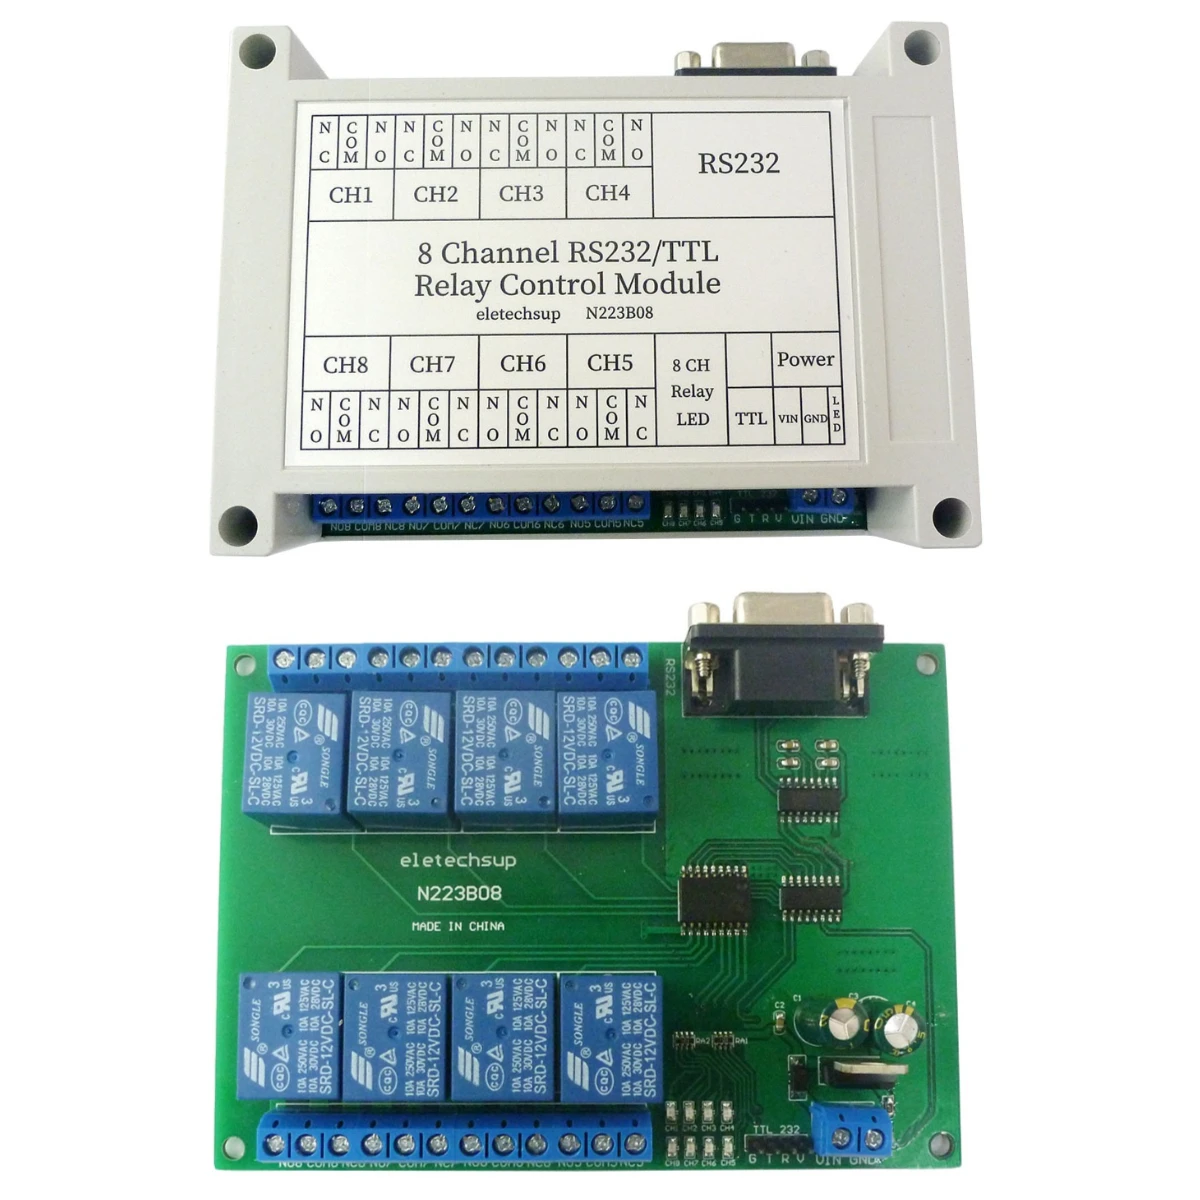 

N223B08 DC 12V 2 IN 1 8Ch RS232/TTL232 Relay Board DB9 Serial Port Switch for PLC Camera Industrial Control System